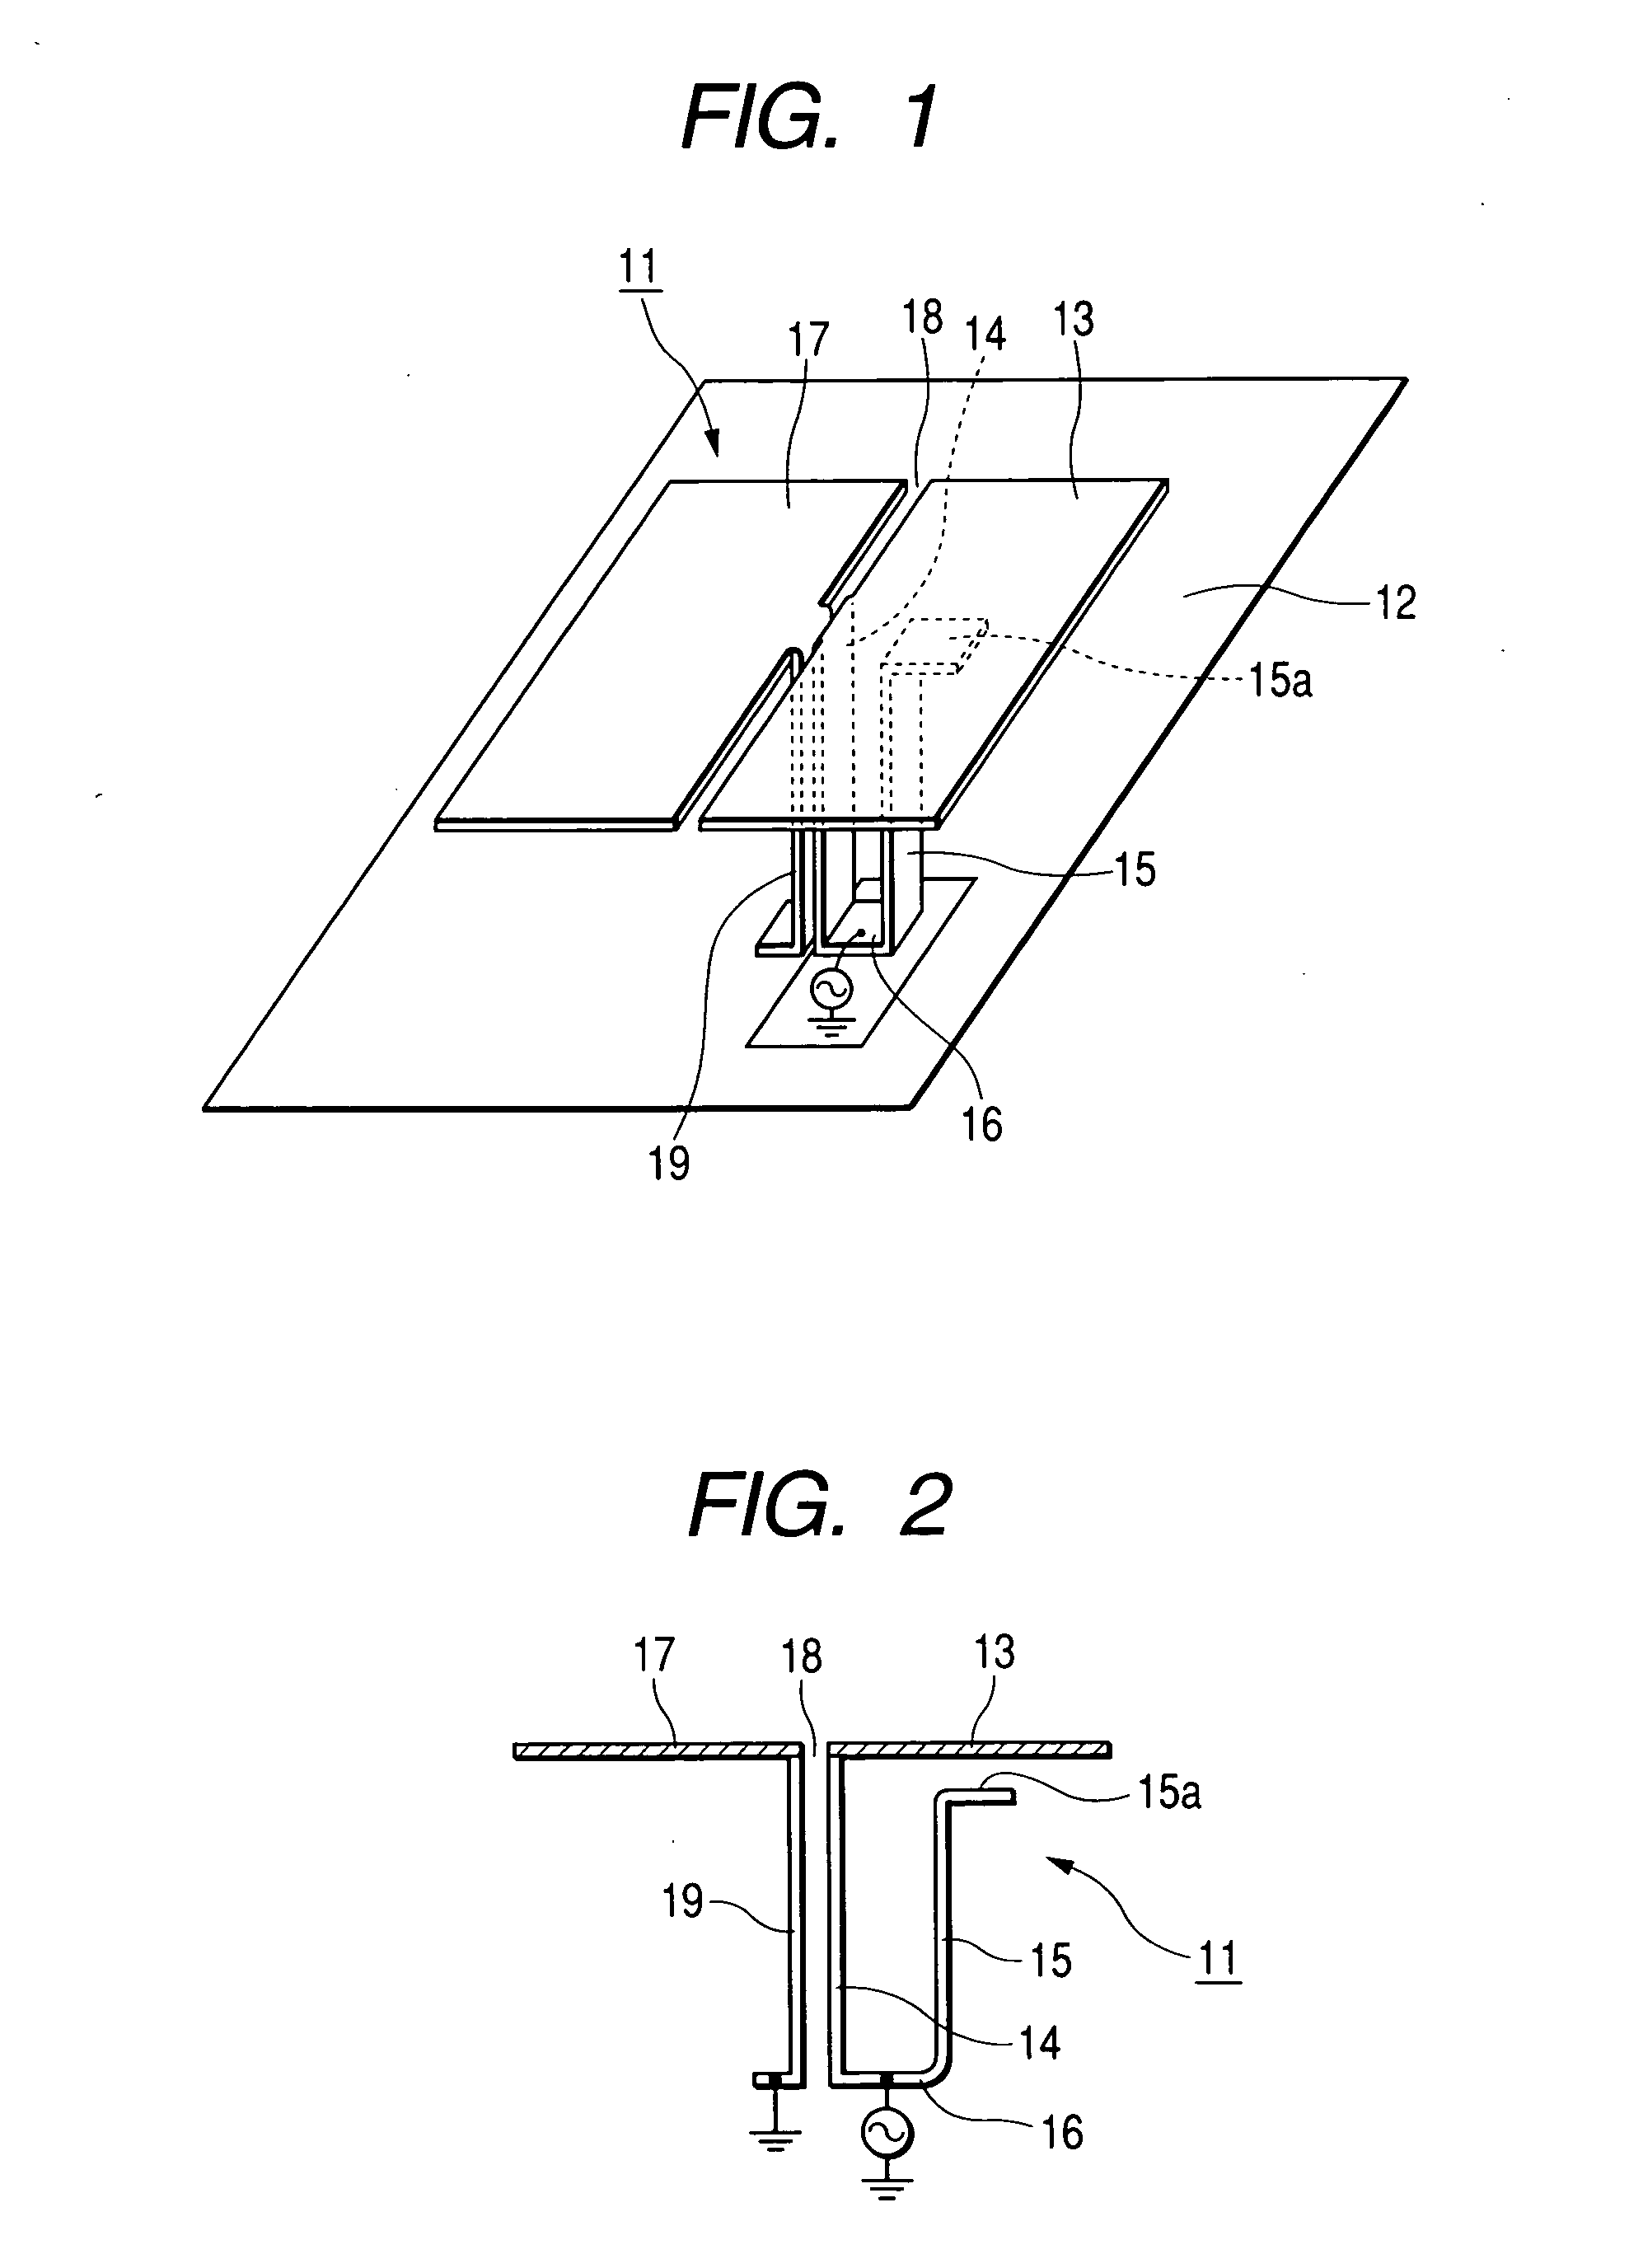 Dual-band antenna having small size and low height